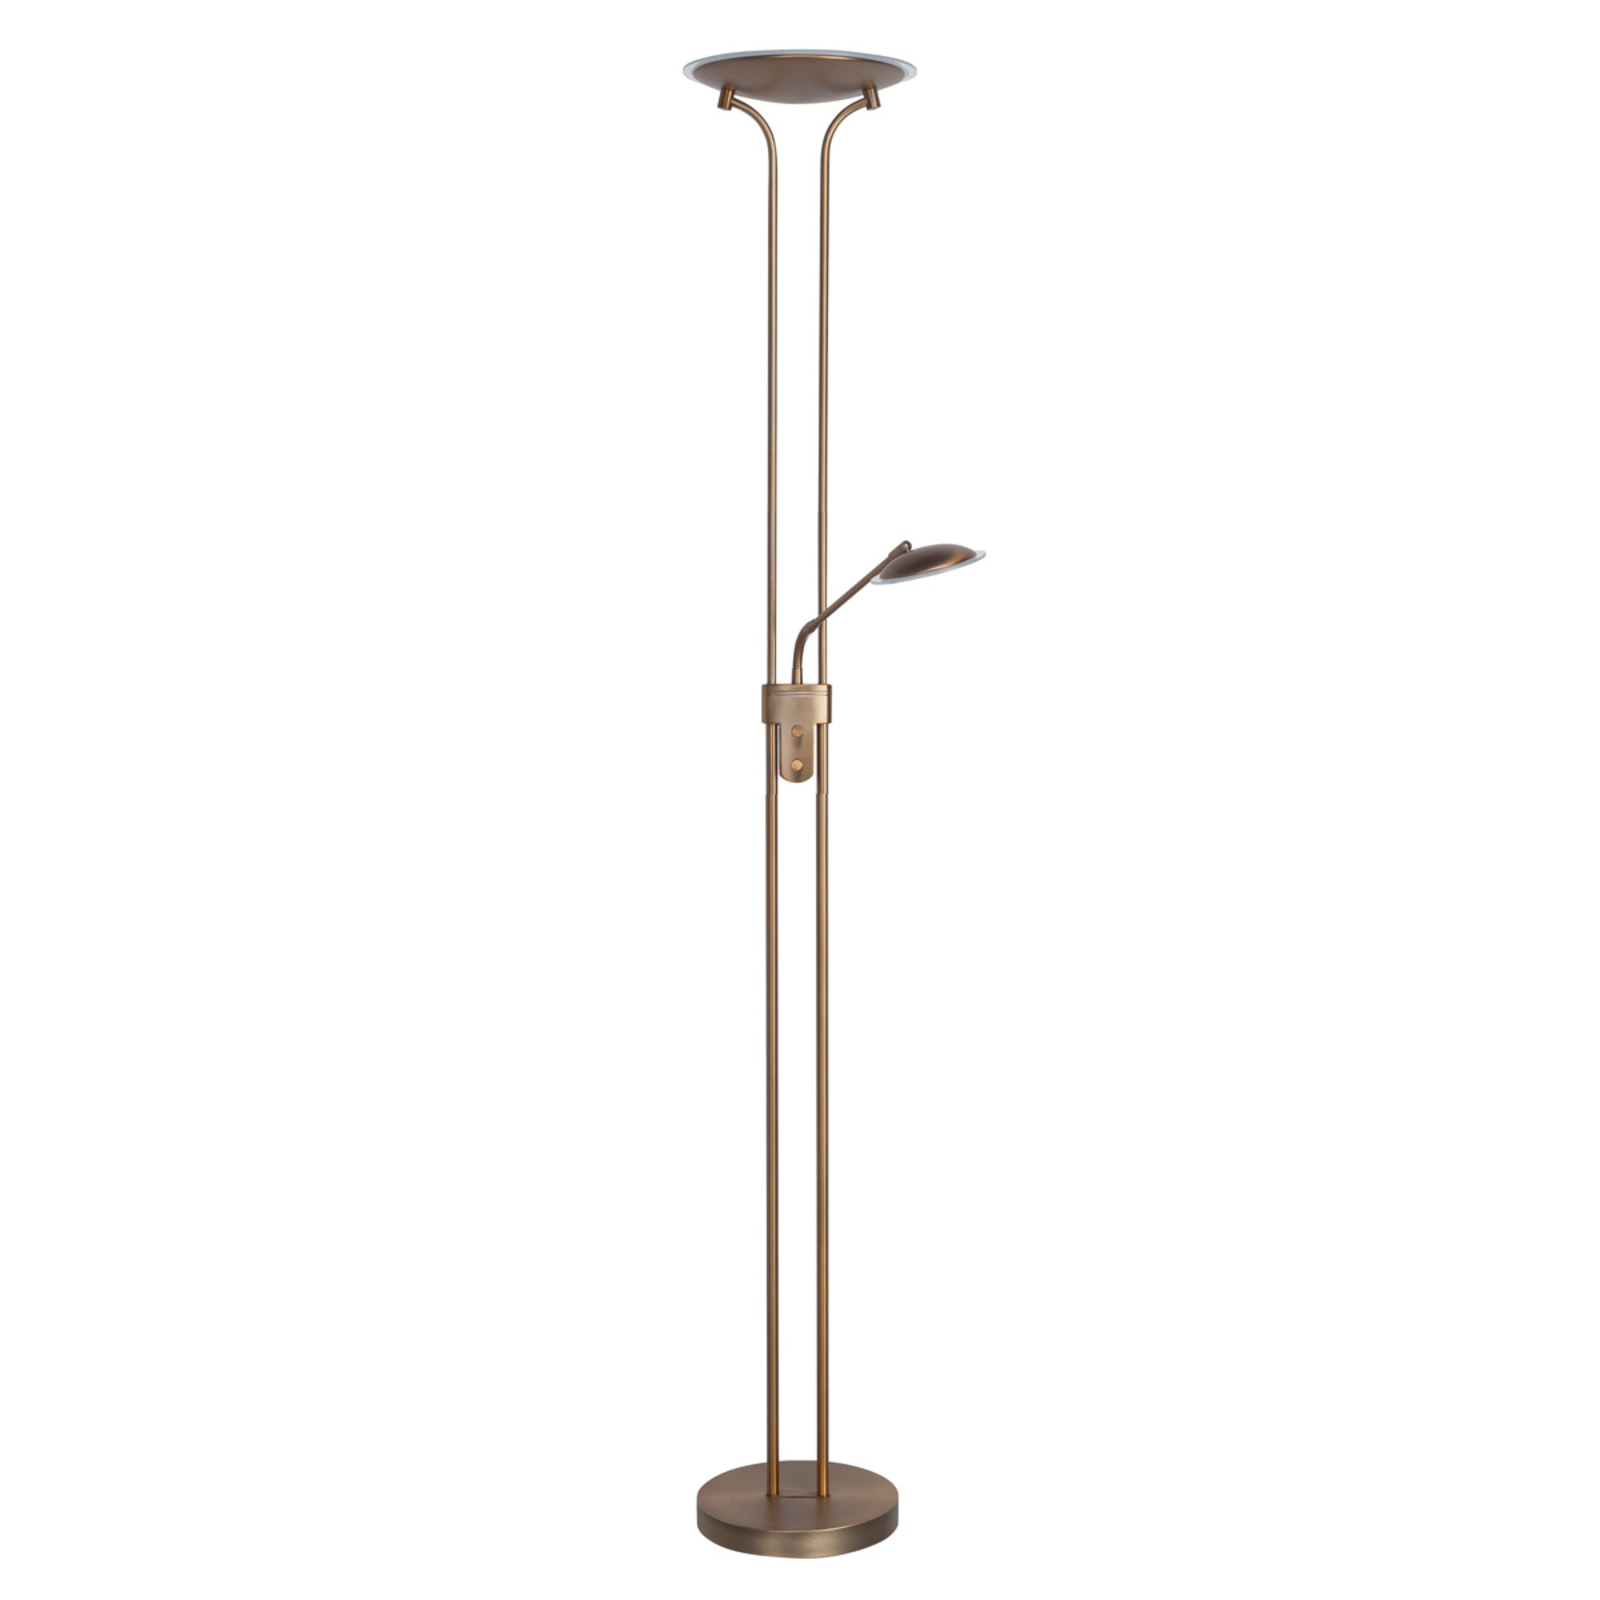 Graceful LED uplighter Lunera with reading lamp